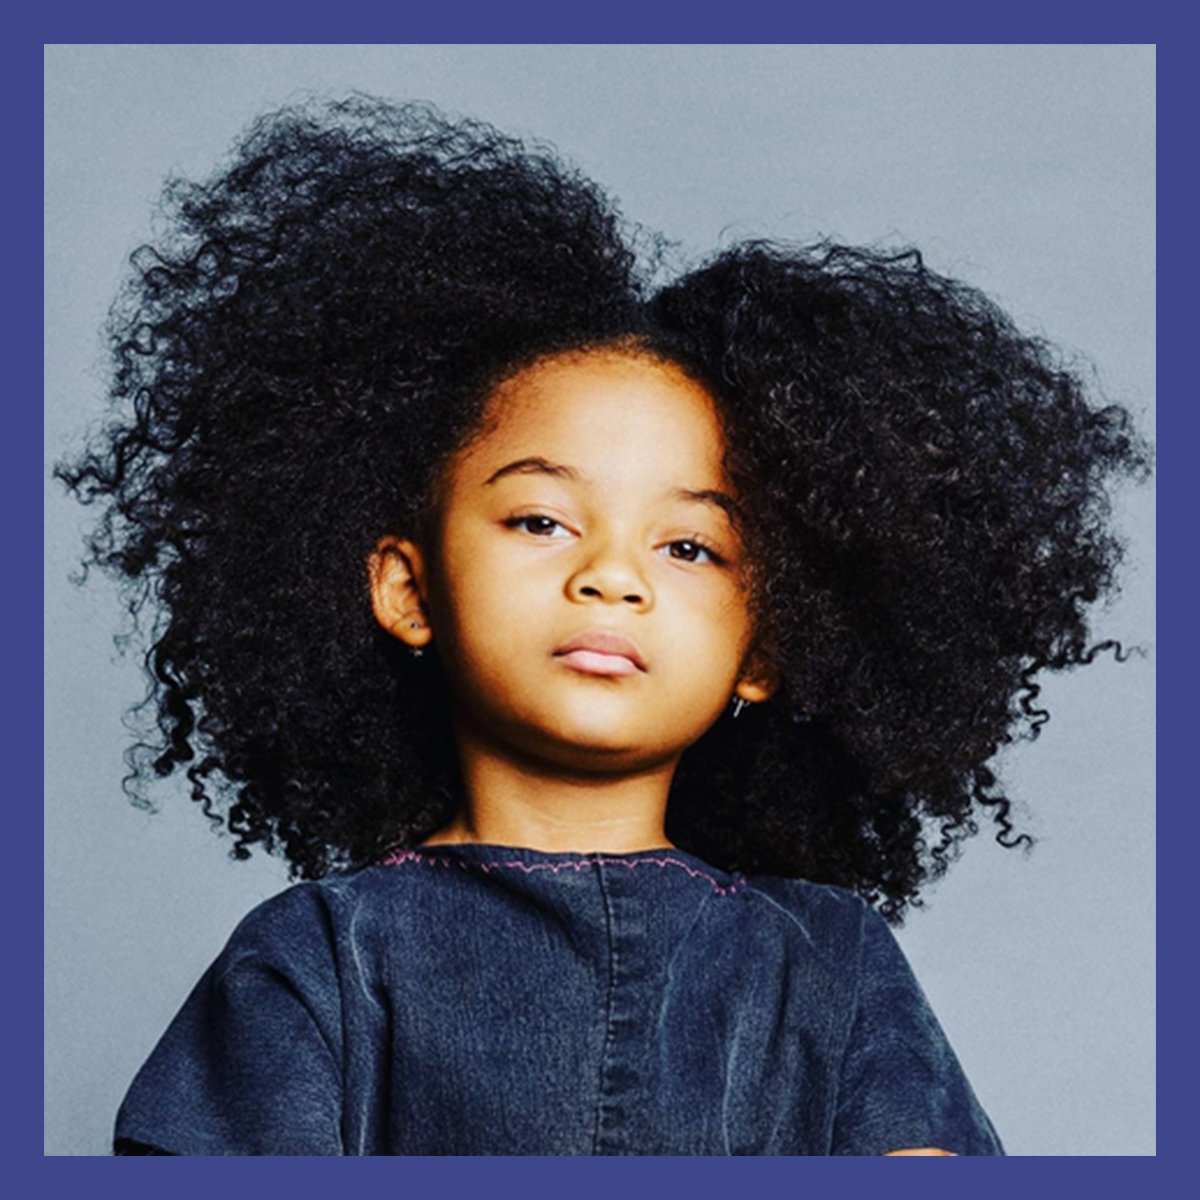 Babygirl, you are magic. Your crown is magic. Your lineage is rooted in magic. #SheaFam, share your #SheaBlackHairStory with us to show us all of your magic. 🖤🖤🖤

📷: 4elliereine
#SheaBlackHairStory #BlackHistoryMonth #BlackFuturesMonth